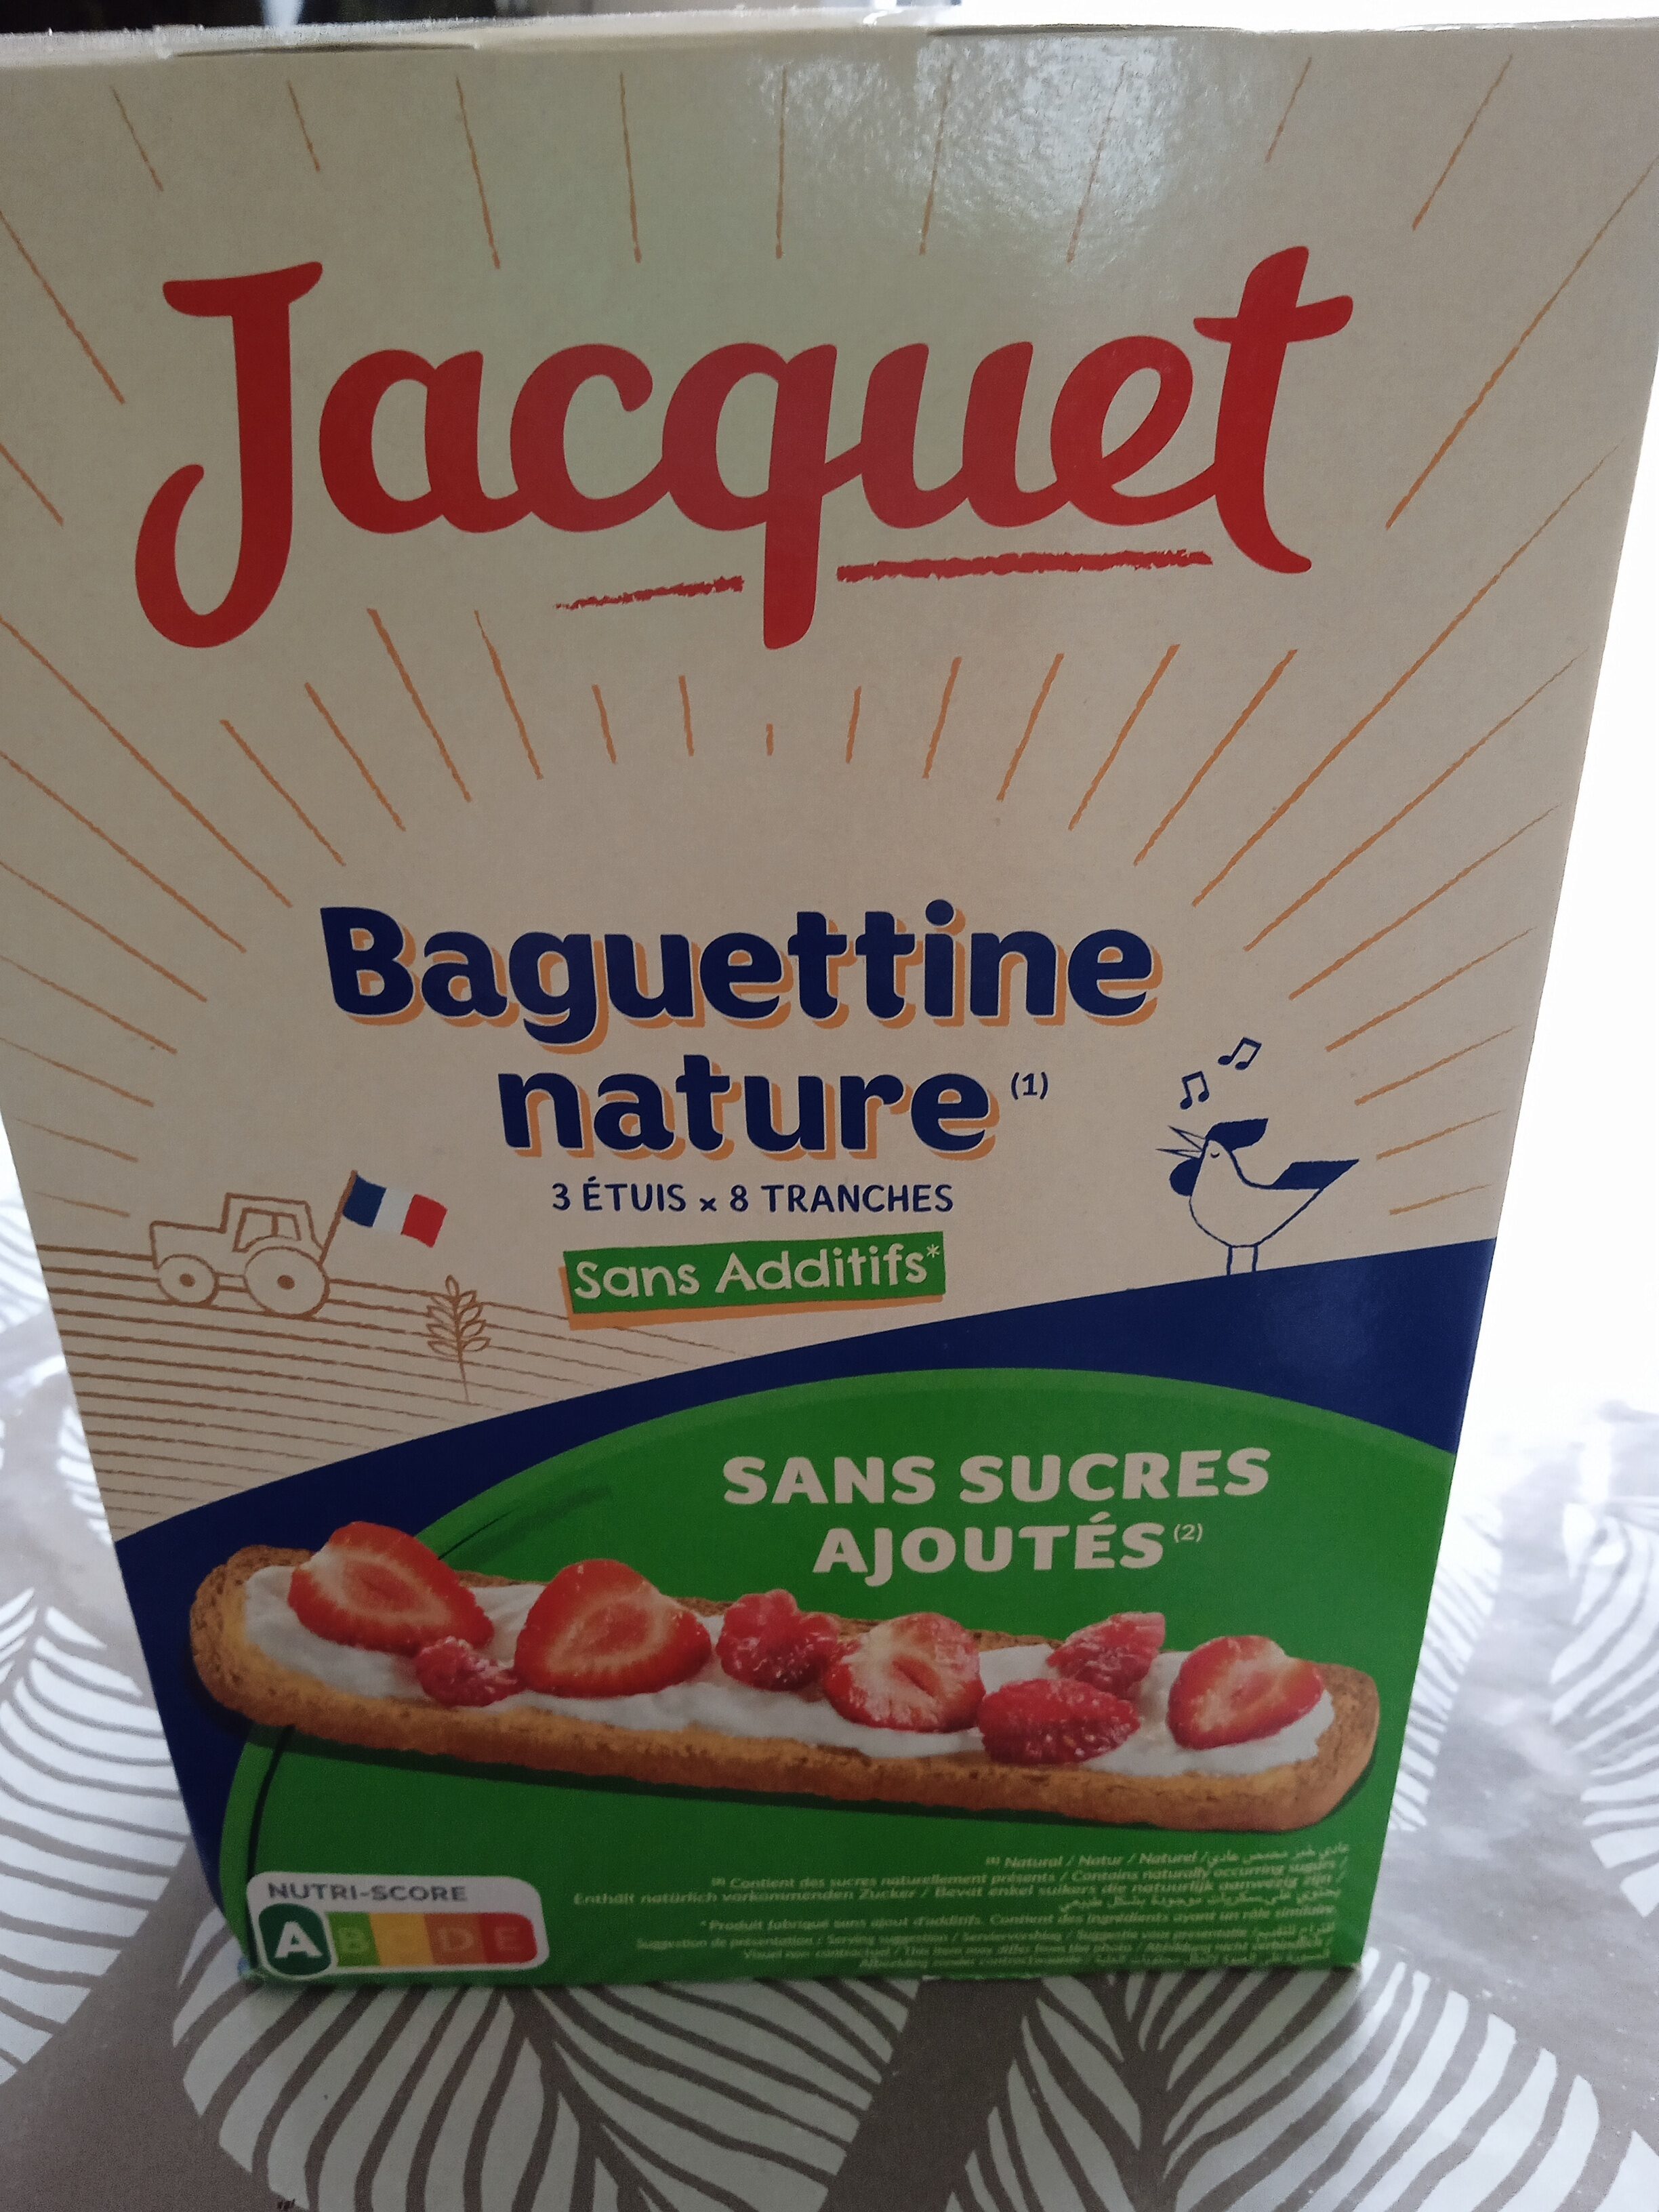 Baguettine nature - Product - fr